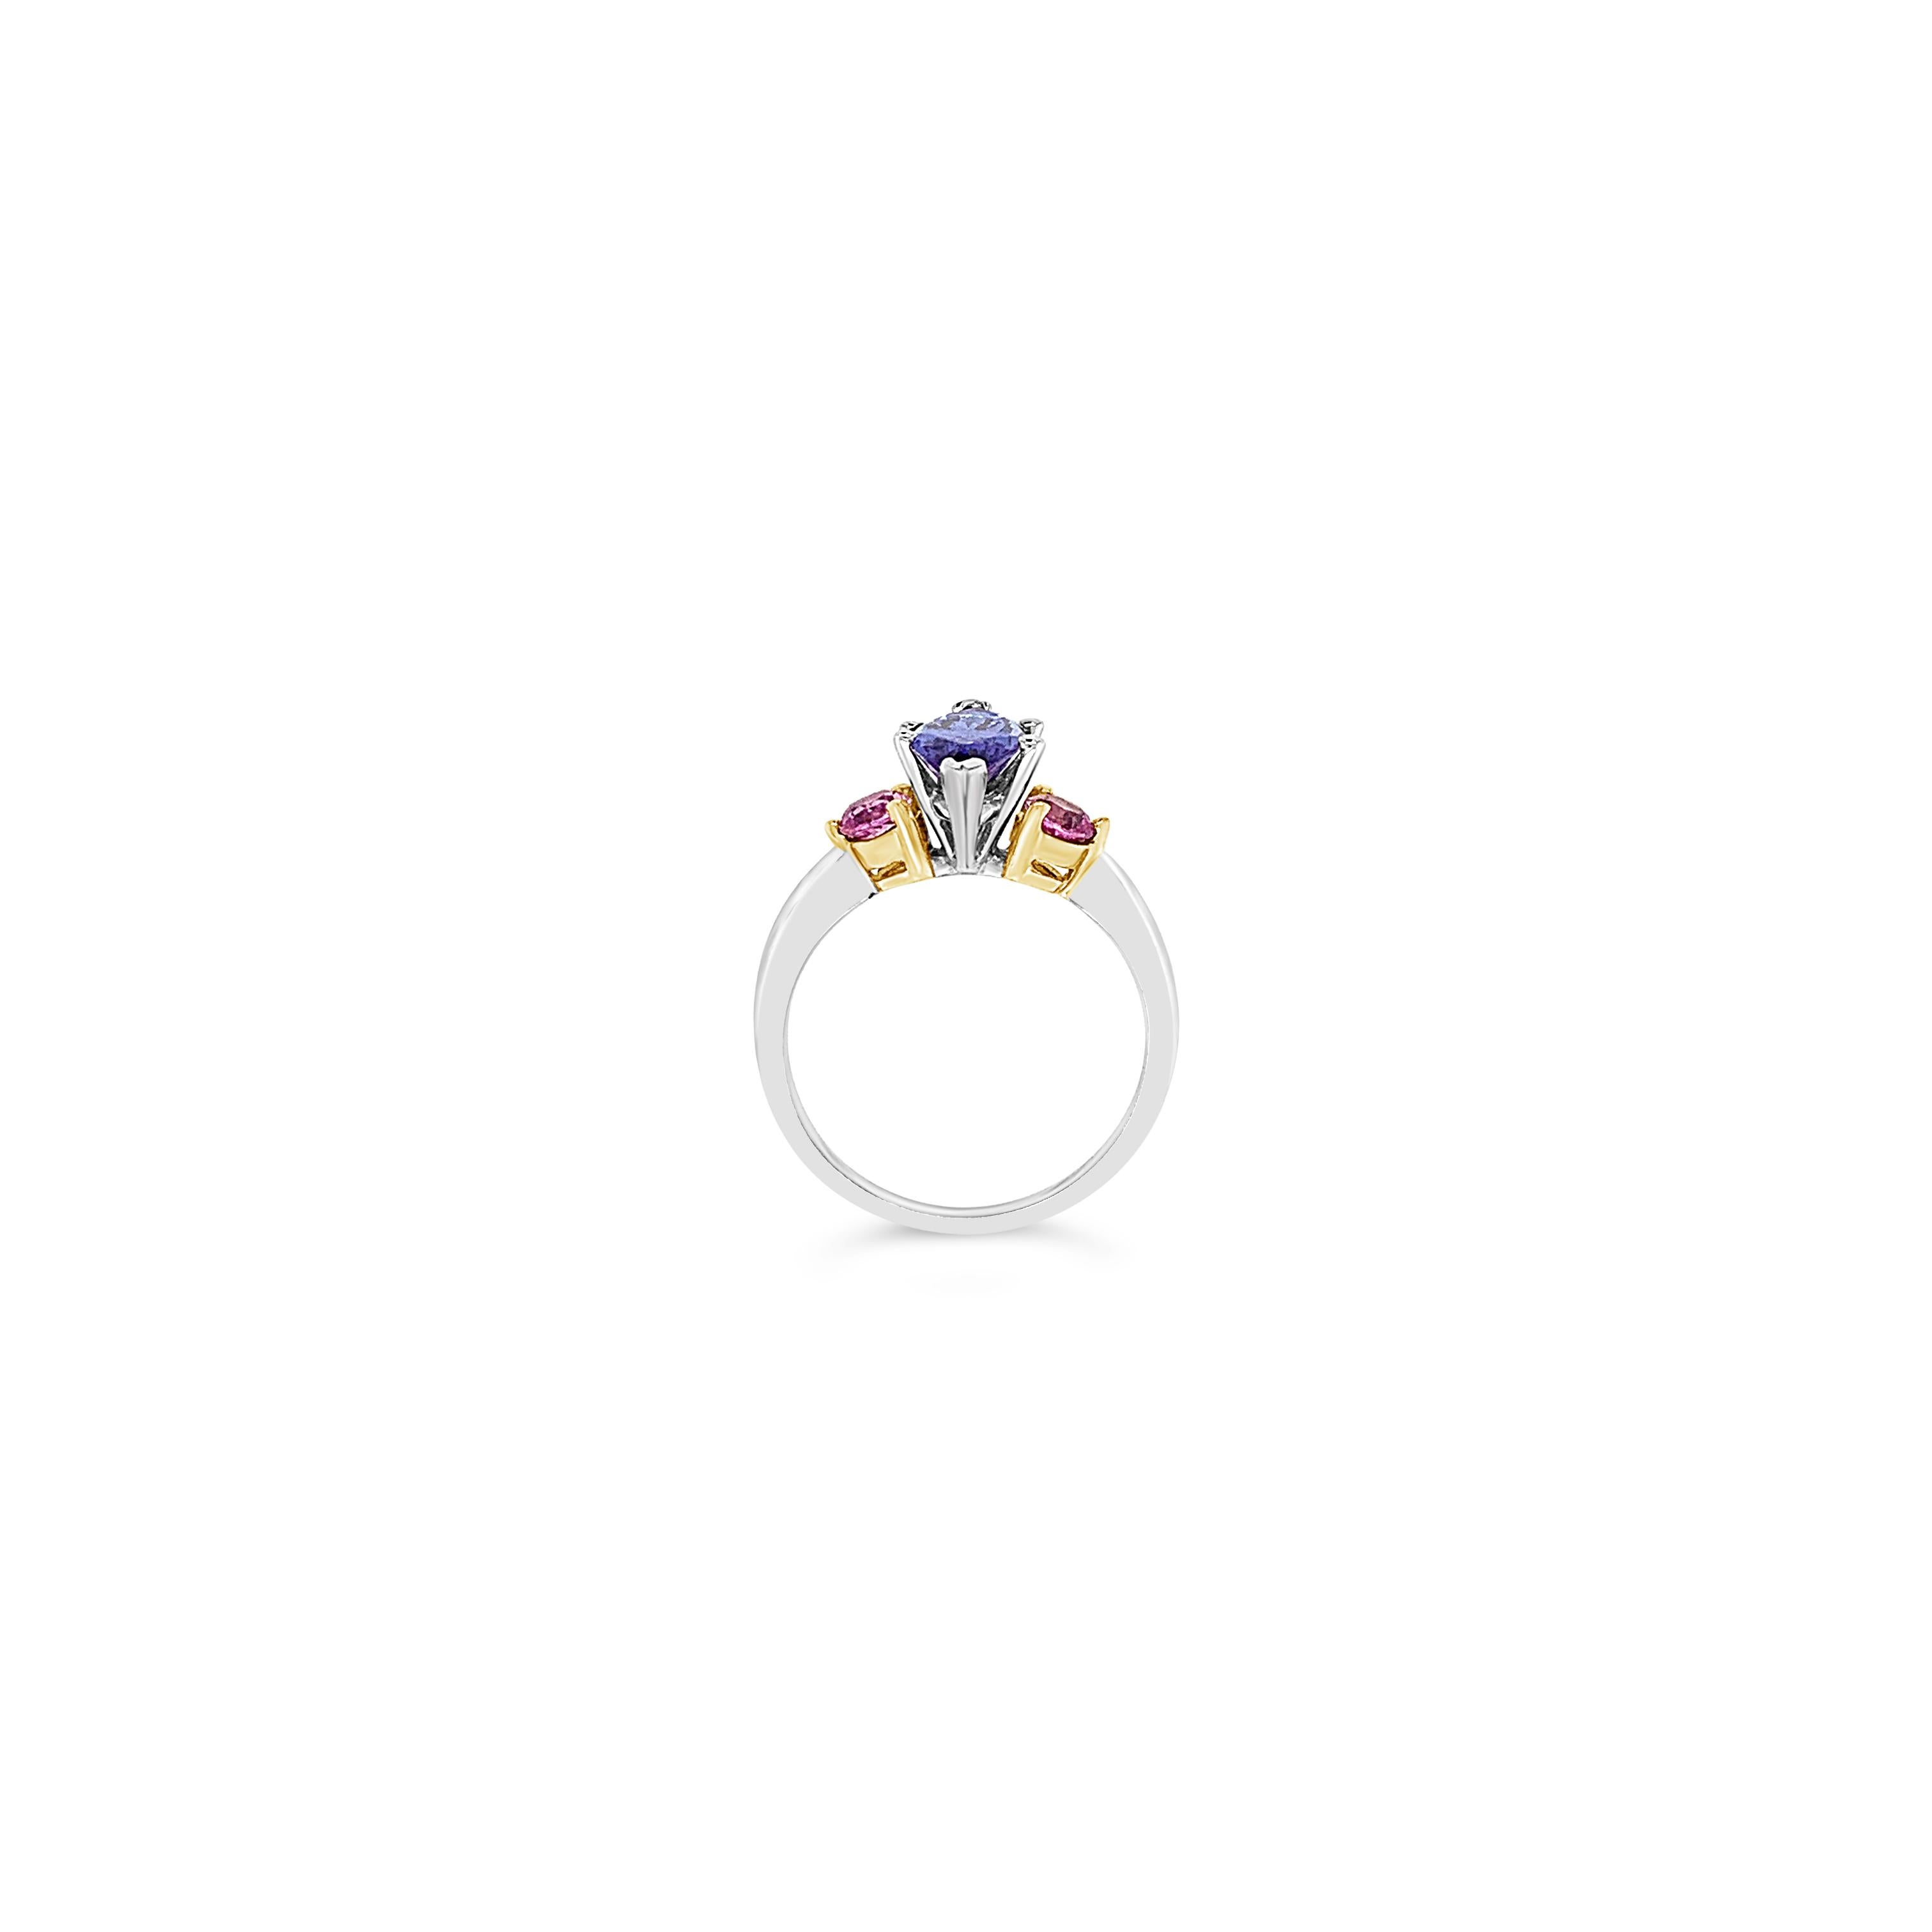 Grand Sample Sale Ring featuring 1 5/8 cts. Blueberry Tanzanite®, 1/2 cts. Bubble Gum Pink Sapphire™, set in 14K Two Tone Gold. Please feel free to reach out with any questions! Item comes with a Le Vian Grand Sample Sale™ jewelry box as well as a